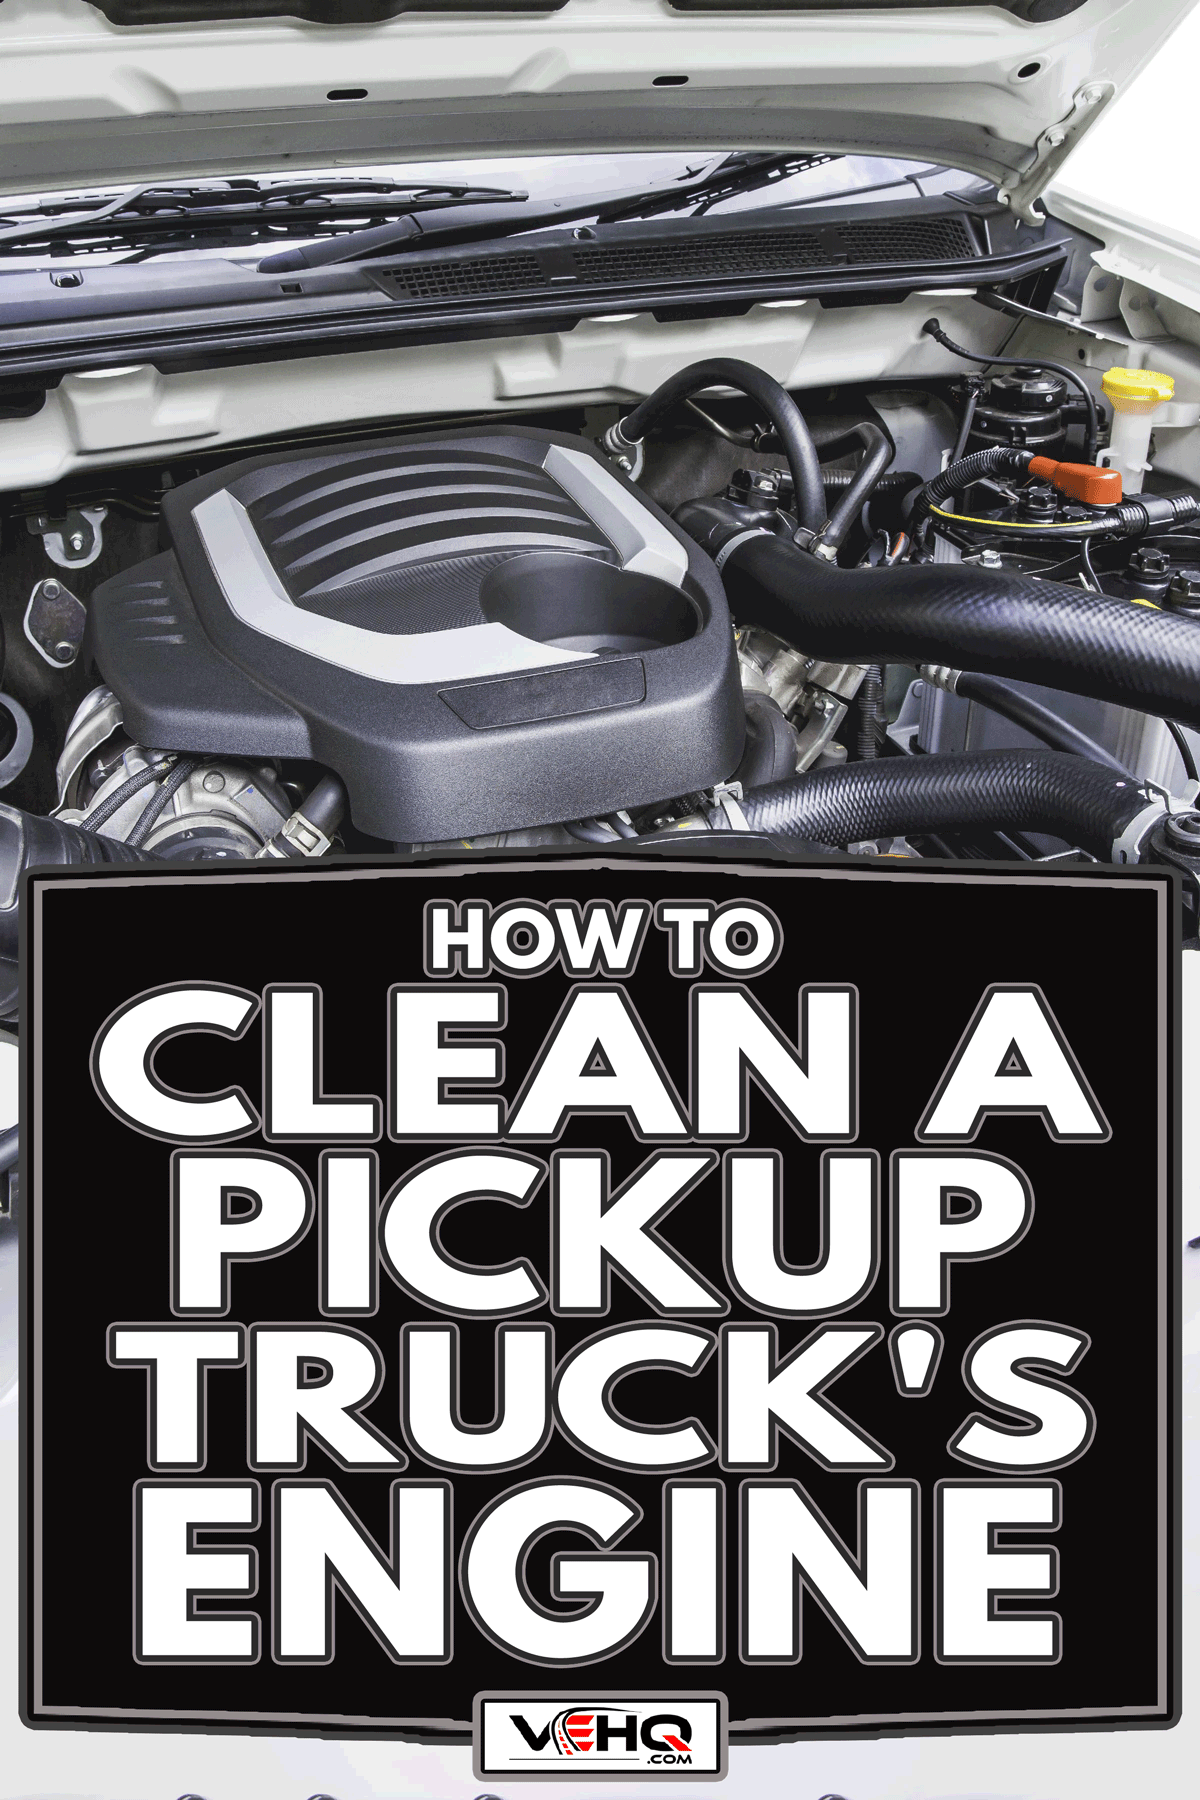 Diesel engine 1.9 lites turbo under the hood of a pickup truck, How To Clean A Pickup Truck's Engine